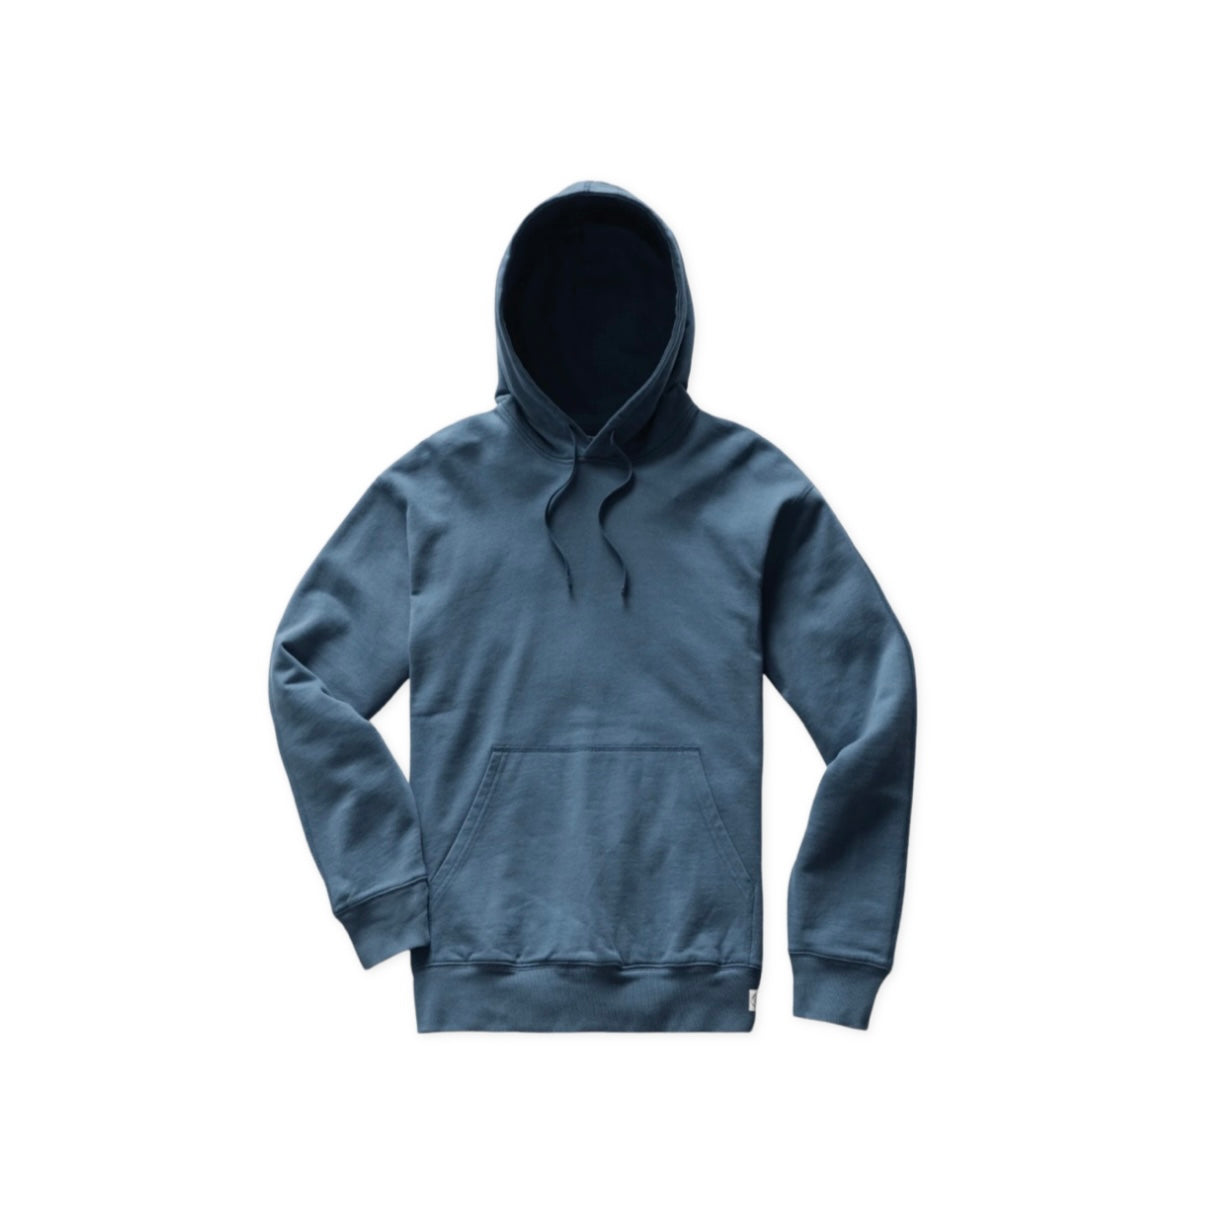 REIGNING CHAMP Lightweight classic hoodie